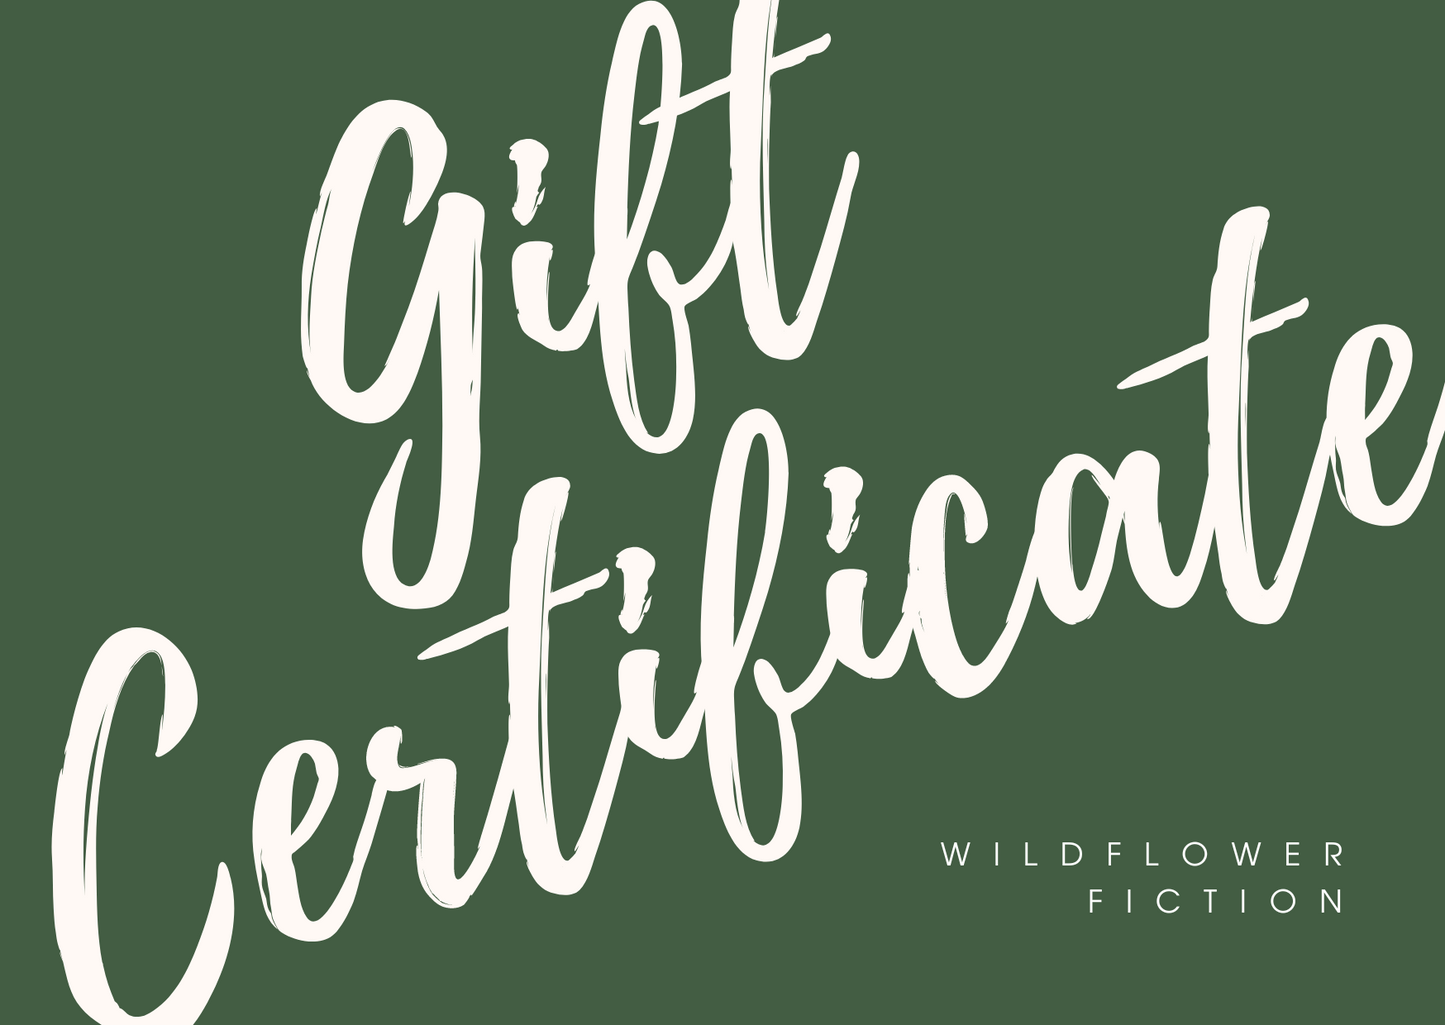 Wildflower Fiction Gift Card